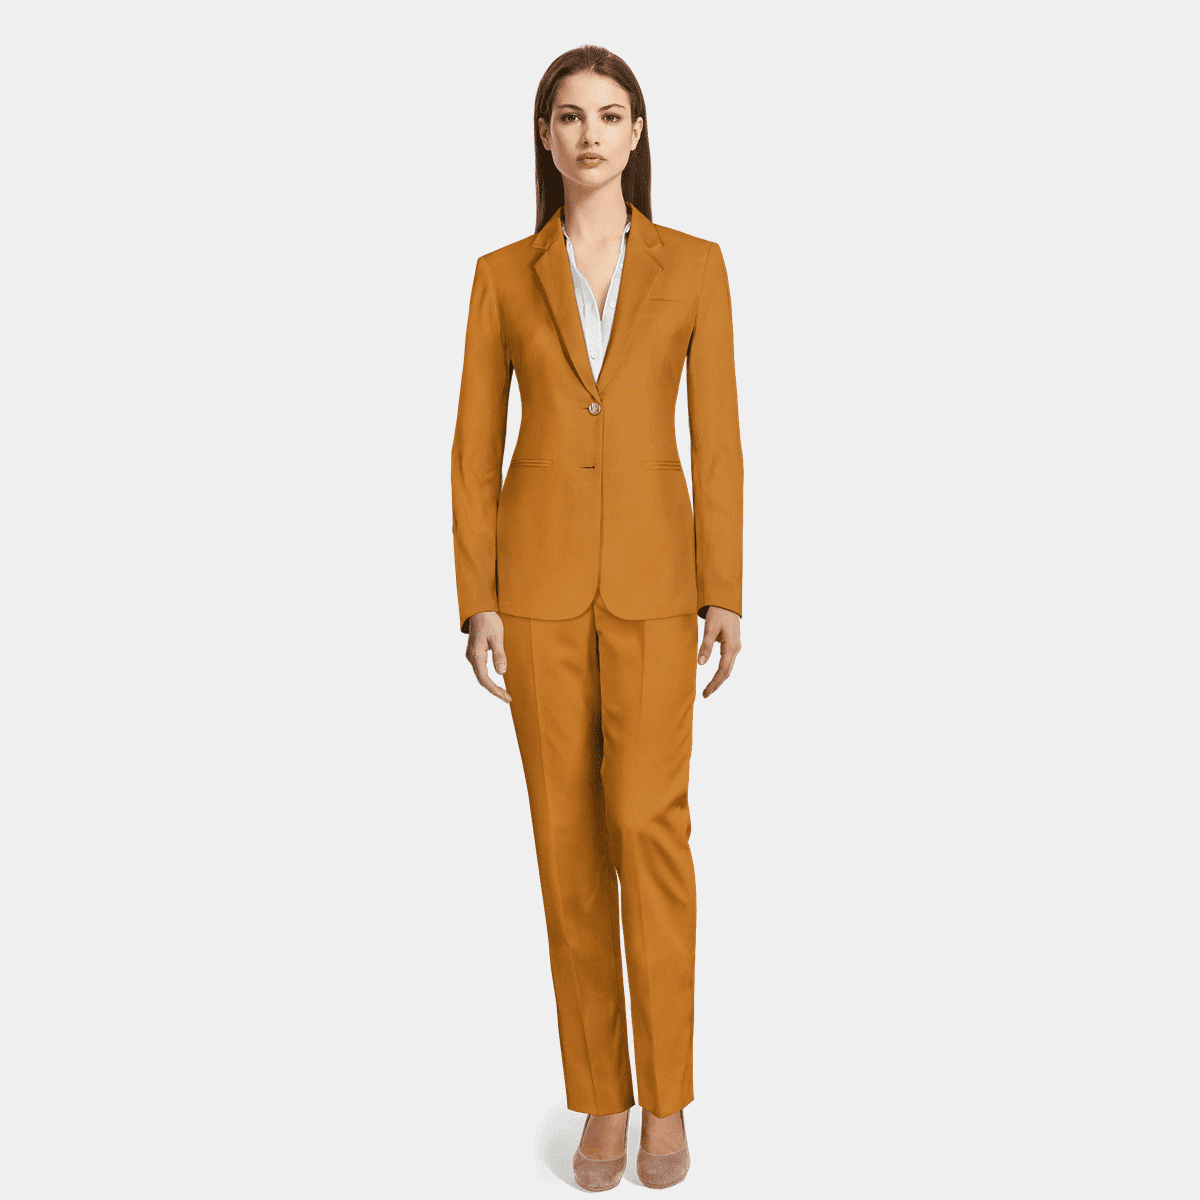 Gold linen Woman Suit | Sumissura